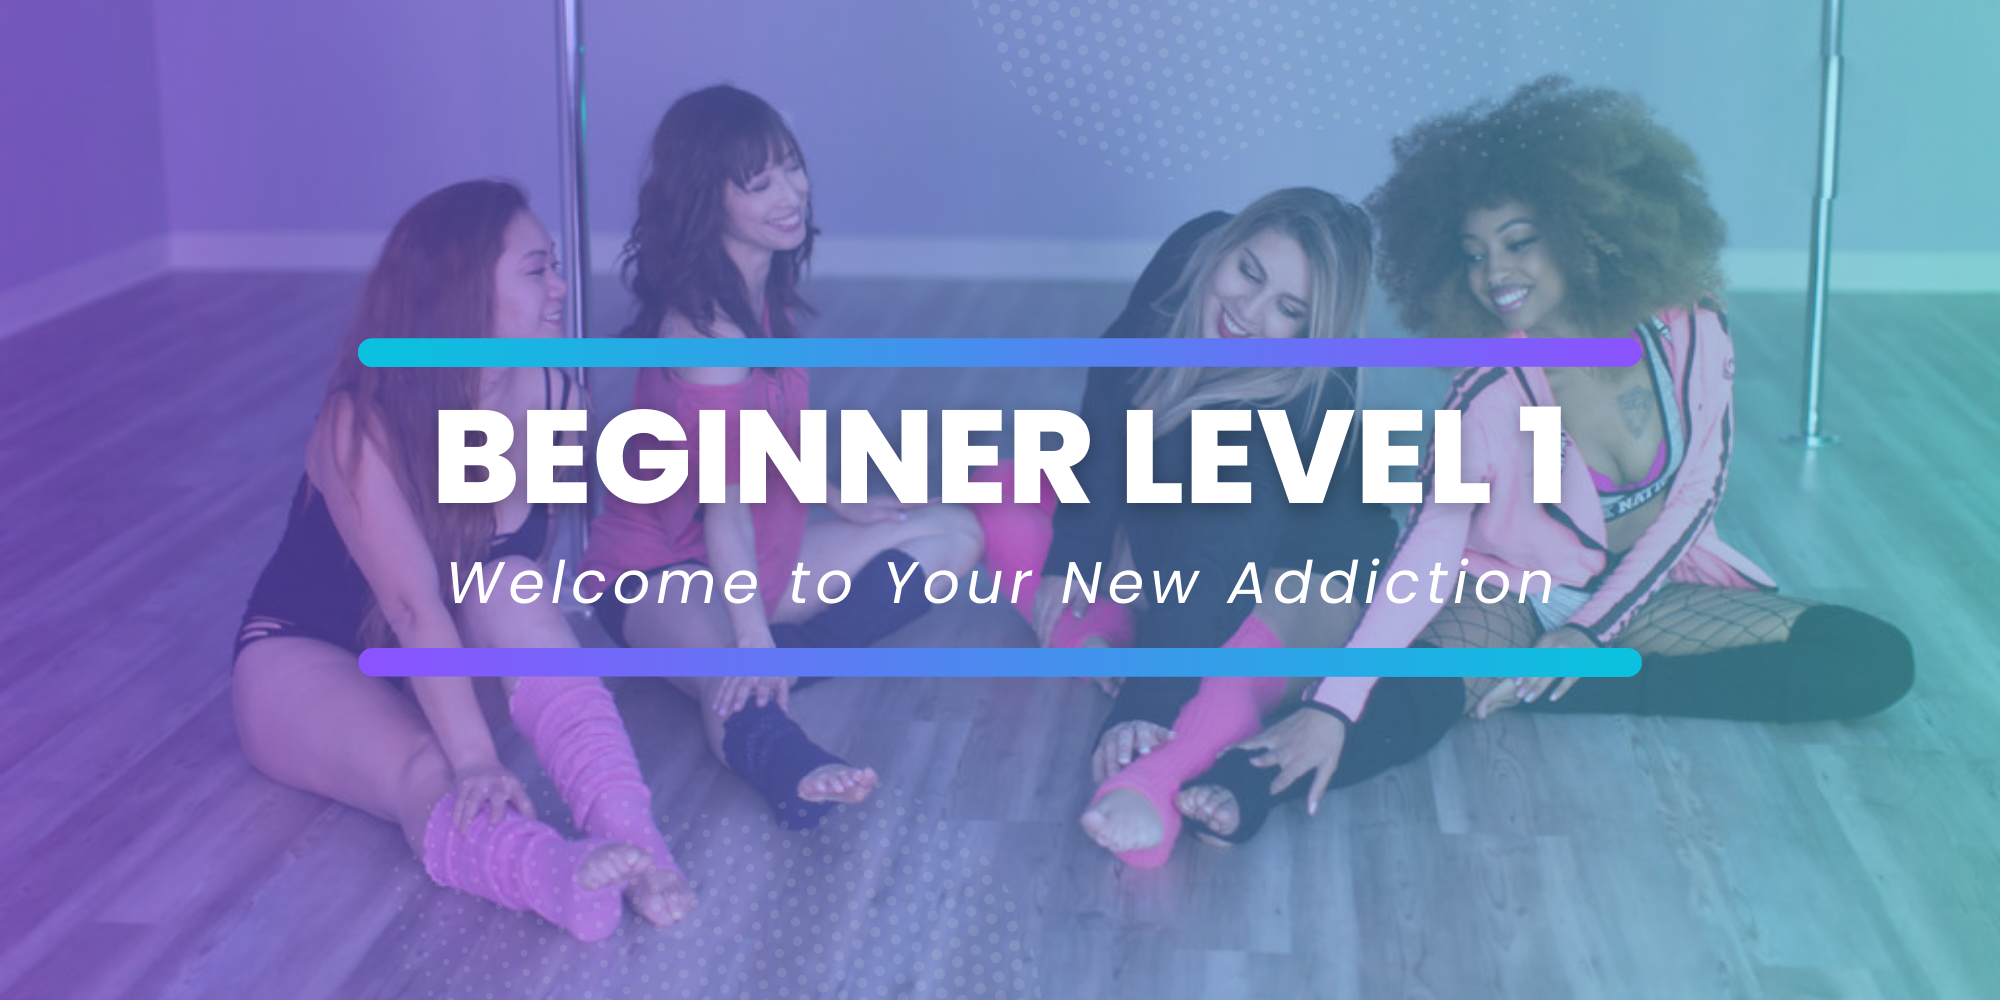 Beginner Level Pole Dance Classes in Puyallup